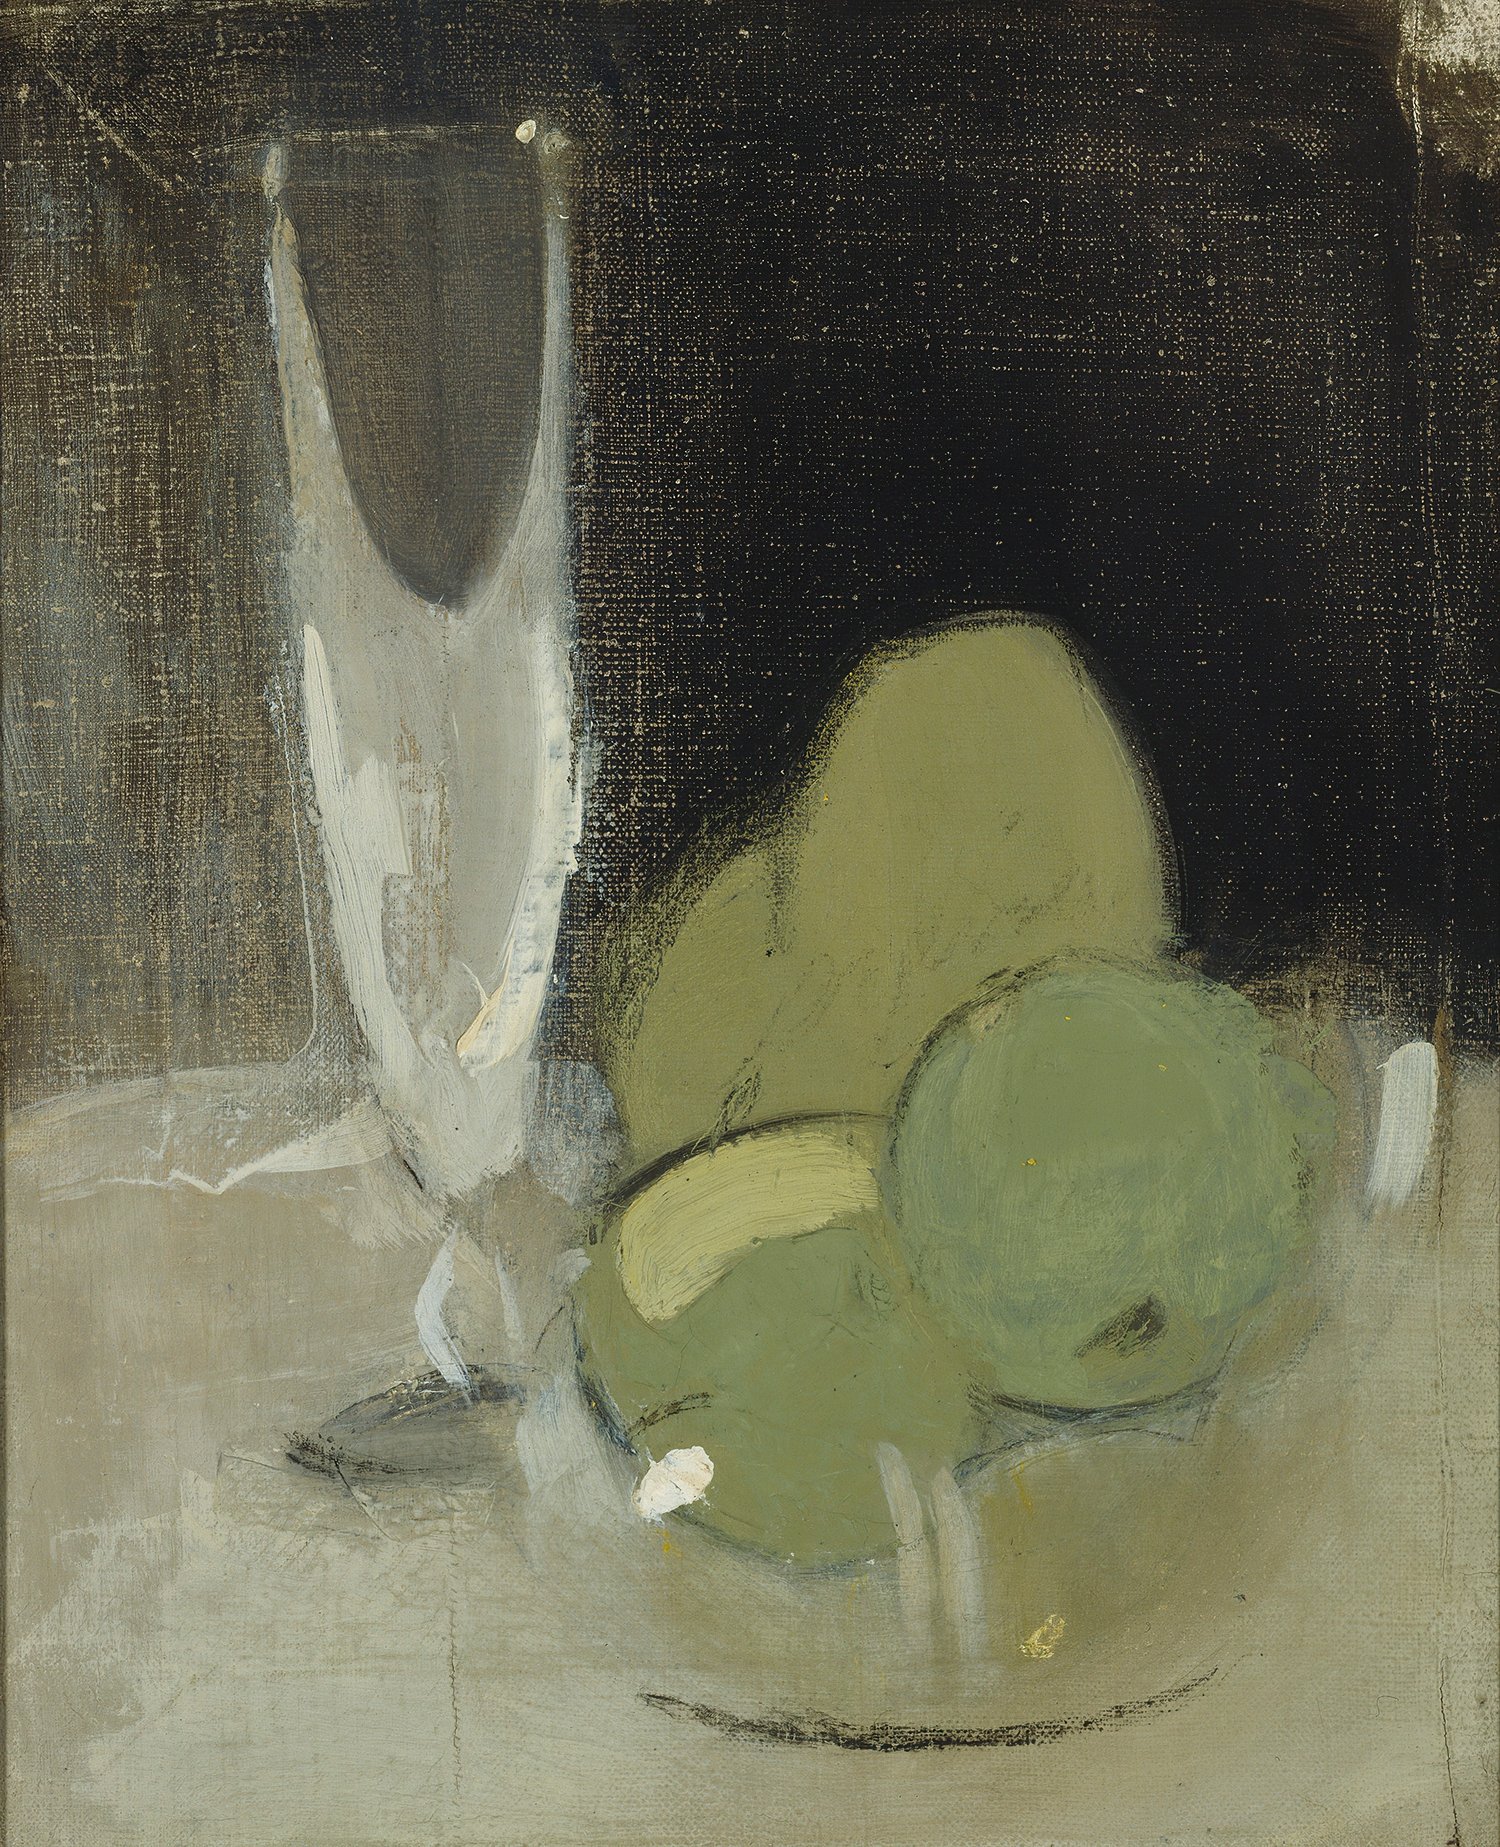 Green Apples And Champagne Glass (1934)